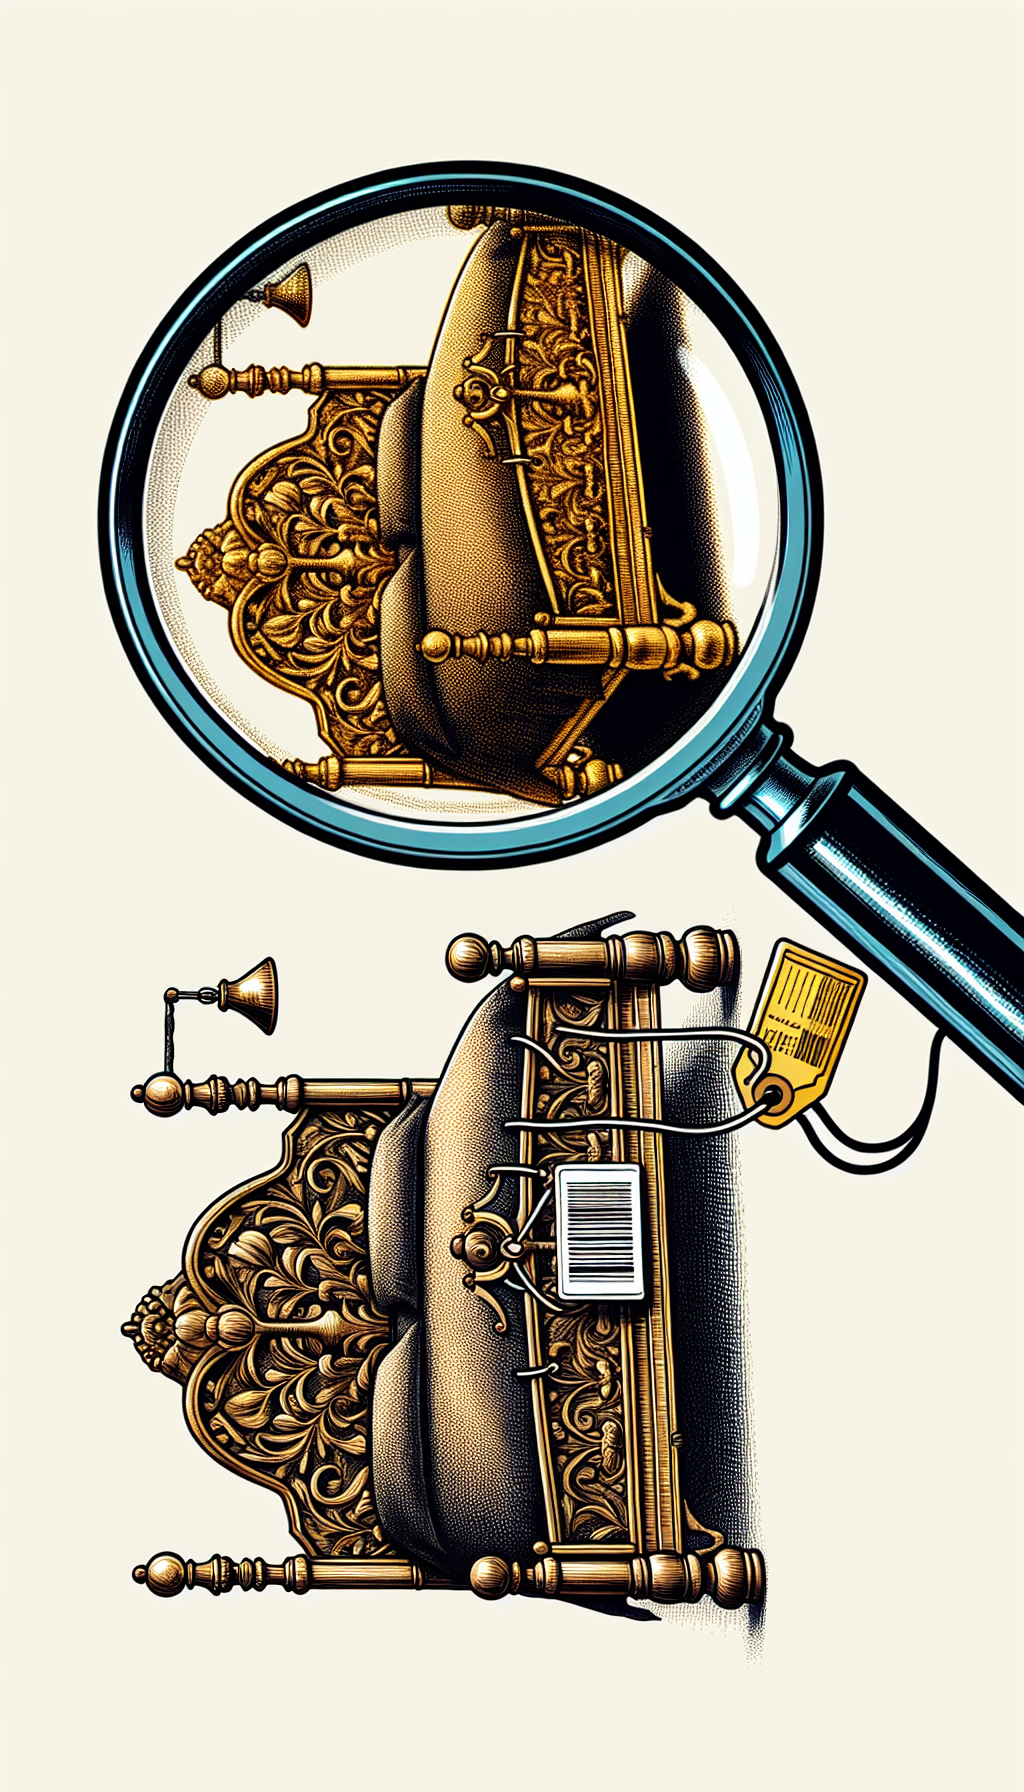 An illustrated magnifying glass hovers over a brass bed, dividing the image; on one side, the pristine, detailed filigree of an authentic antique bed shines, value tags hanging off the frame, while on the other, a dull, less intricate reproduction with a barcode sticker. The magnifying glass reveals hidden expert marks that distinguish genuine value from an imitation.